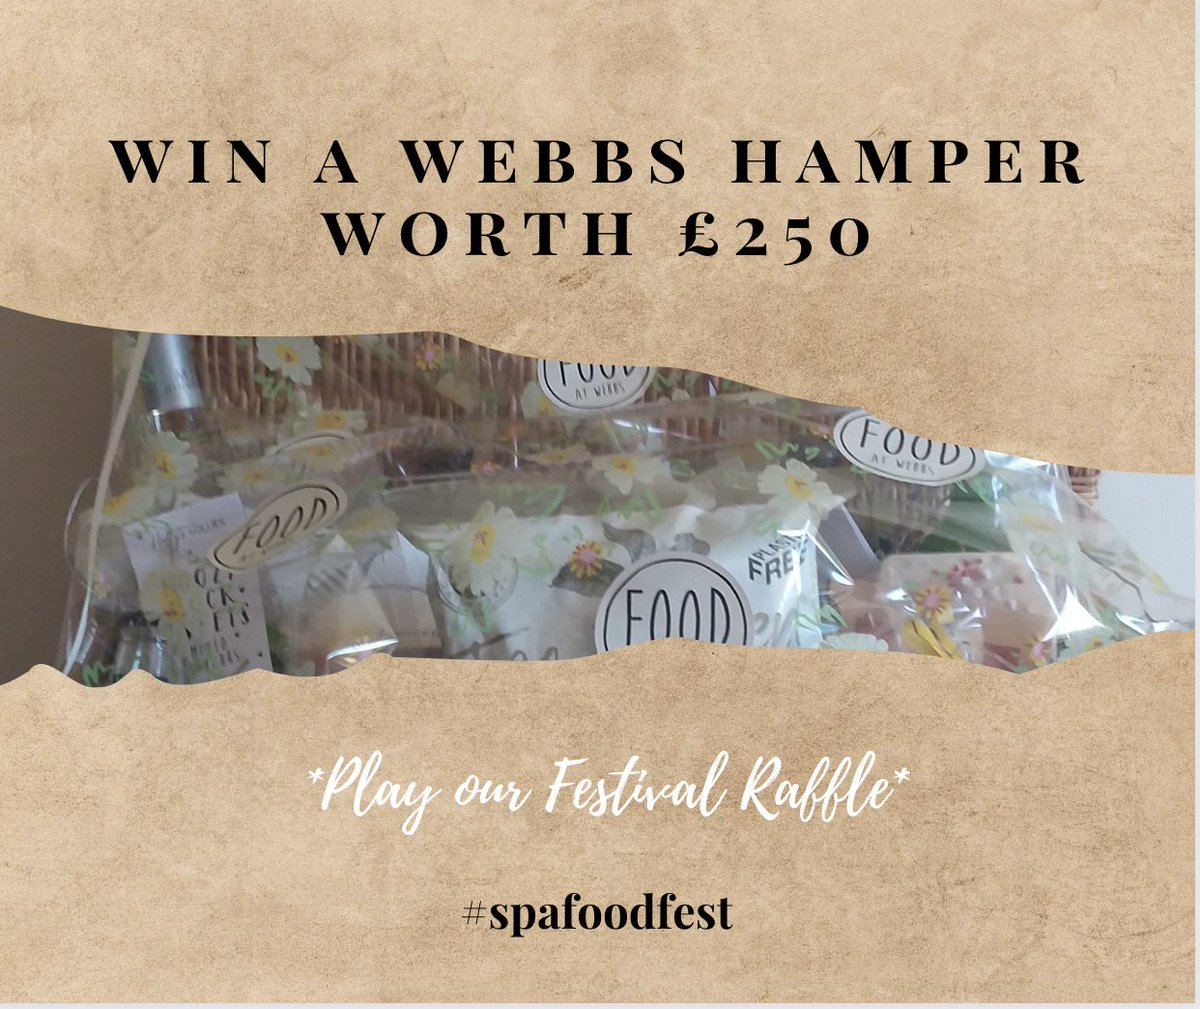 £1 to win this tasty hamper packed full of treats kindly donated by @FoodatWebbs with proceeds going to support Ukrainian families relocating to #worcestershire Bring on the festivities #spafoodfest #droitwich #droitwichspa #supportlocal Thx @WebbsGC